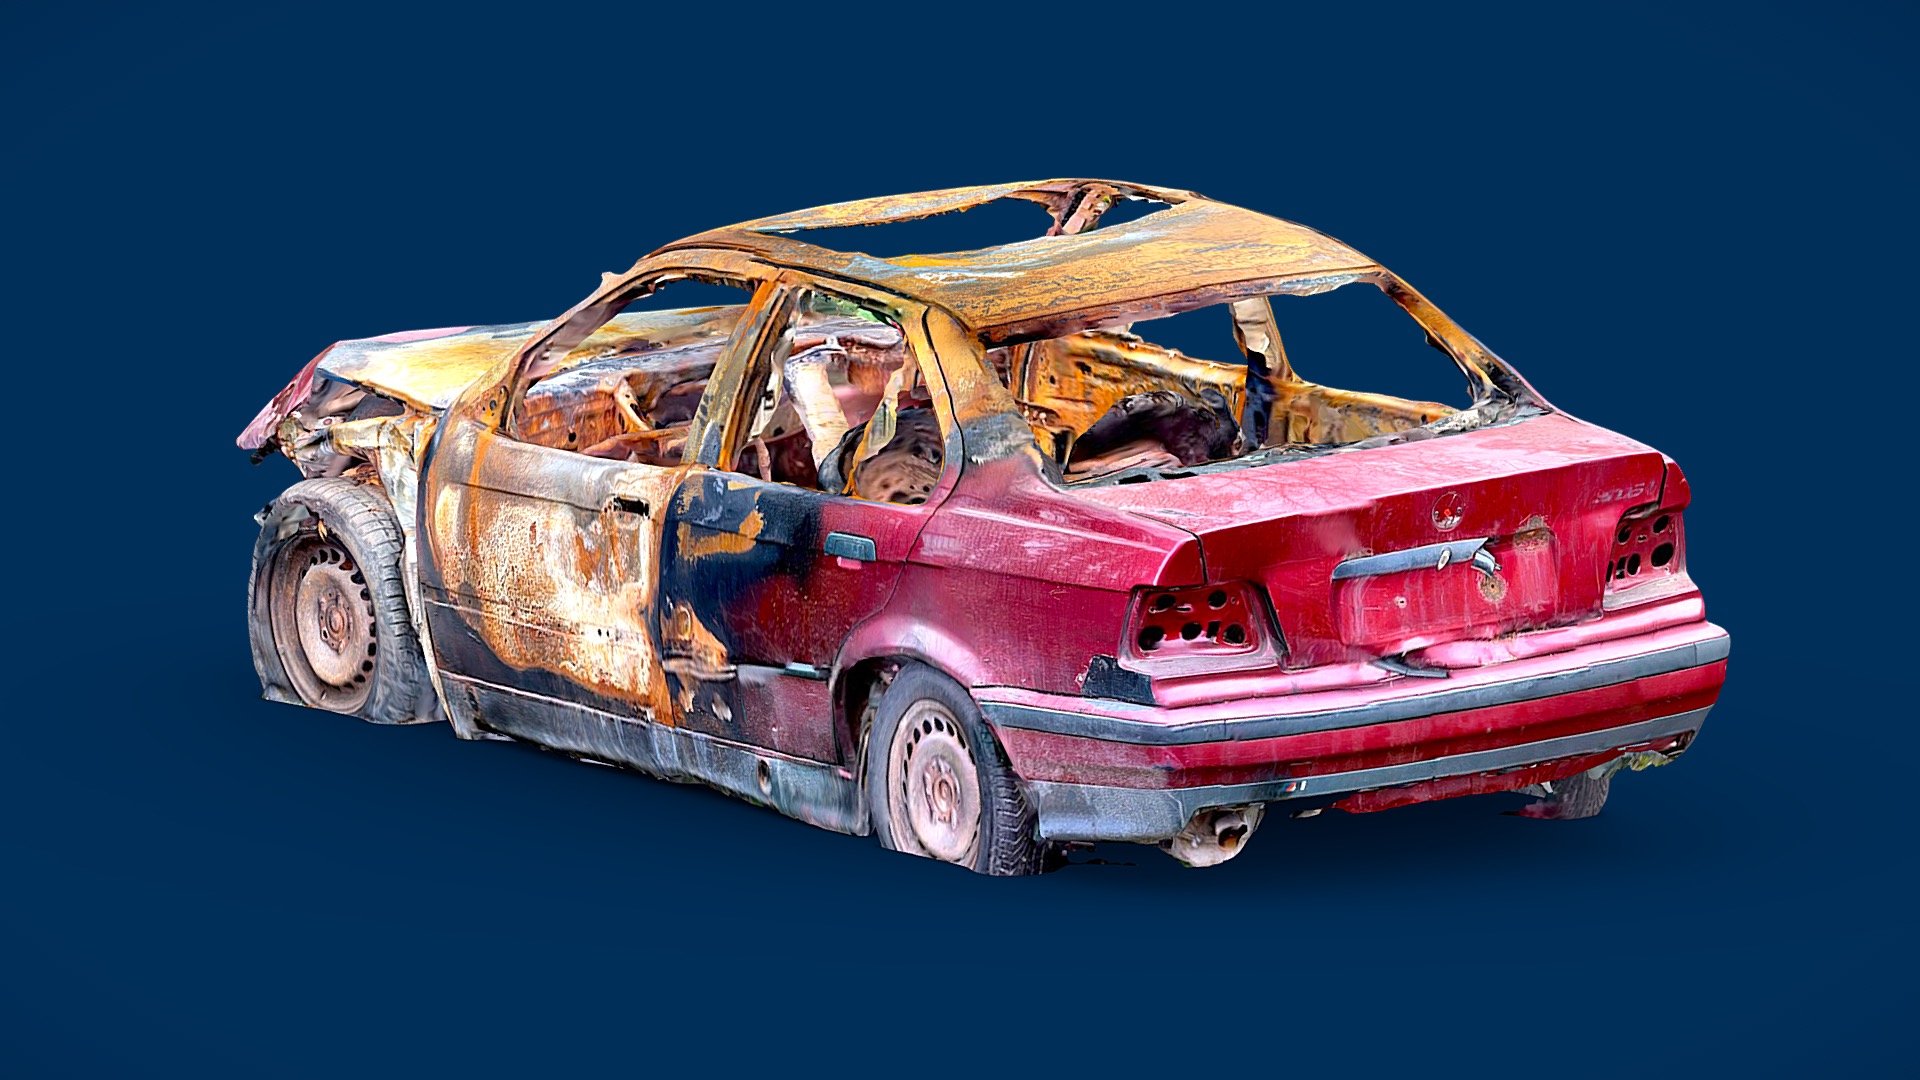 Totally wrecked and burnt car. 
Quick scan made with Scaniverse, I might use it as a reference for a future painting 3d model